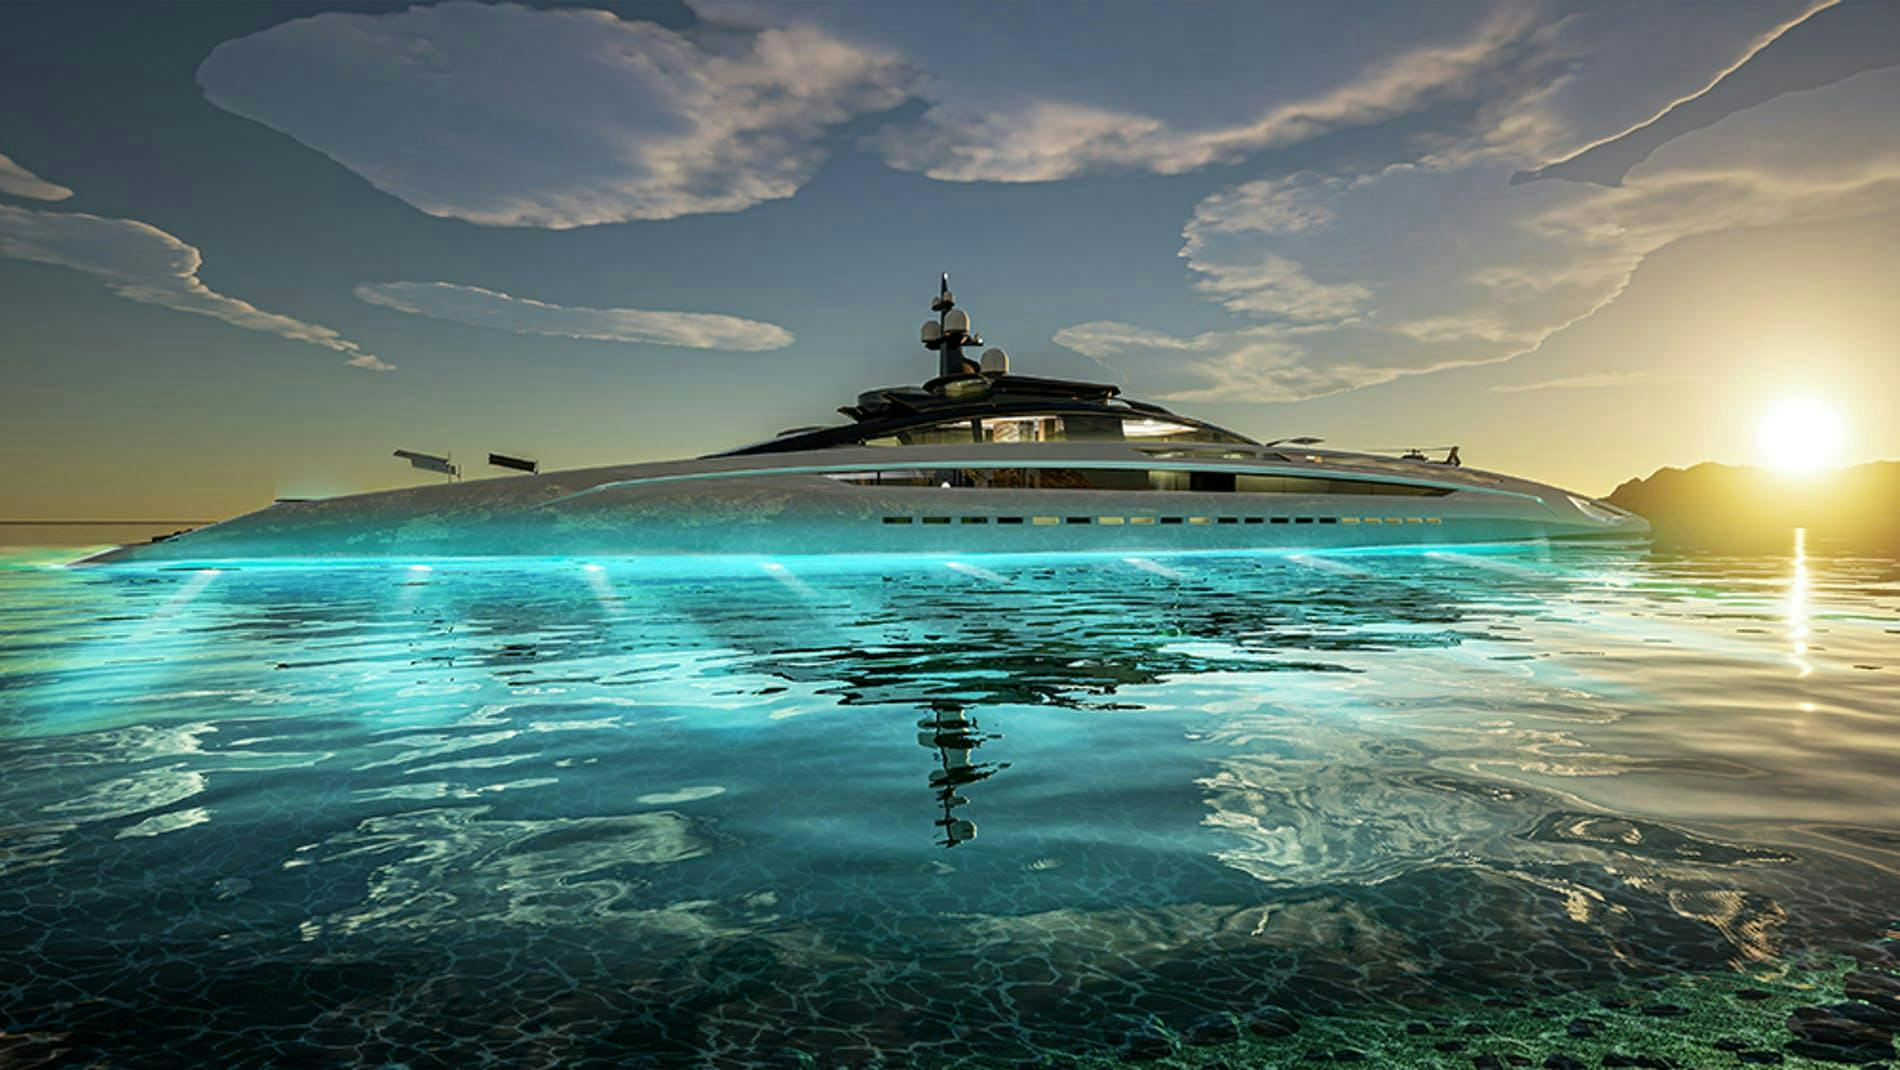 yacht vehicle transportation water outdoors nature